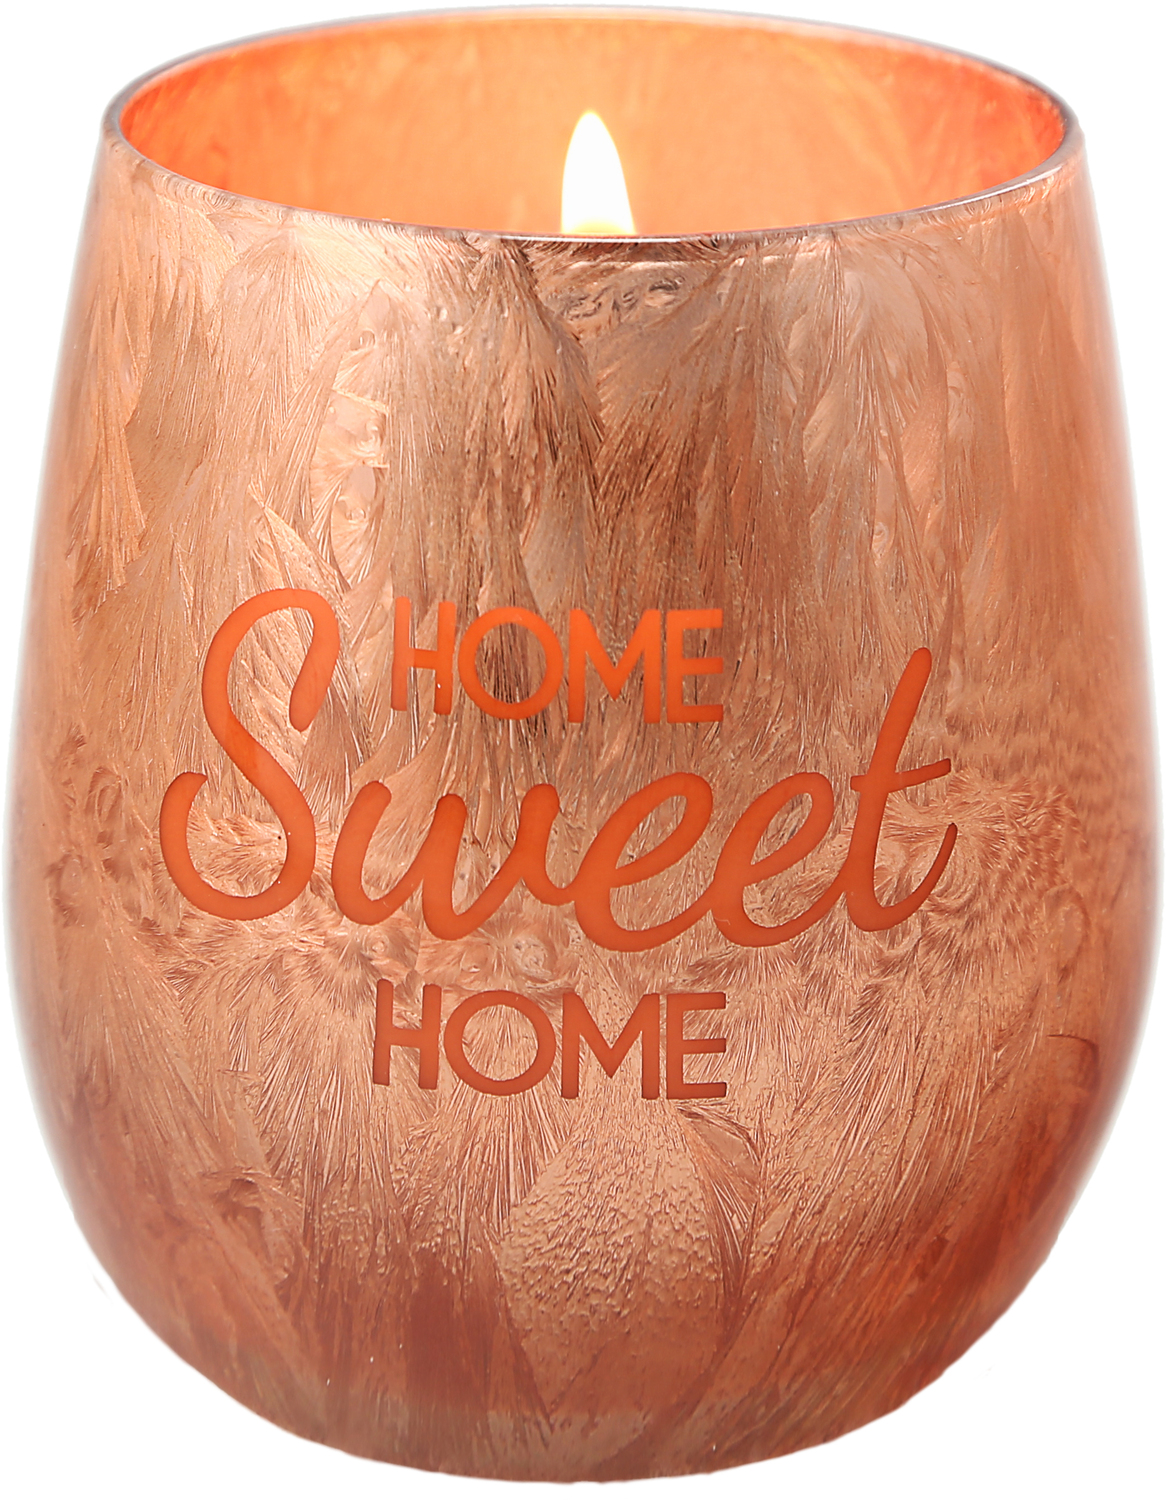 Home by Hostess with the Mostess - Home - 10 oz - 100% Soy Wax Electroplated Candle
Scent: Fresh Cotton